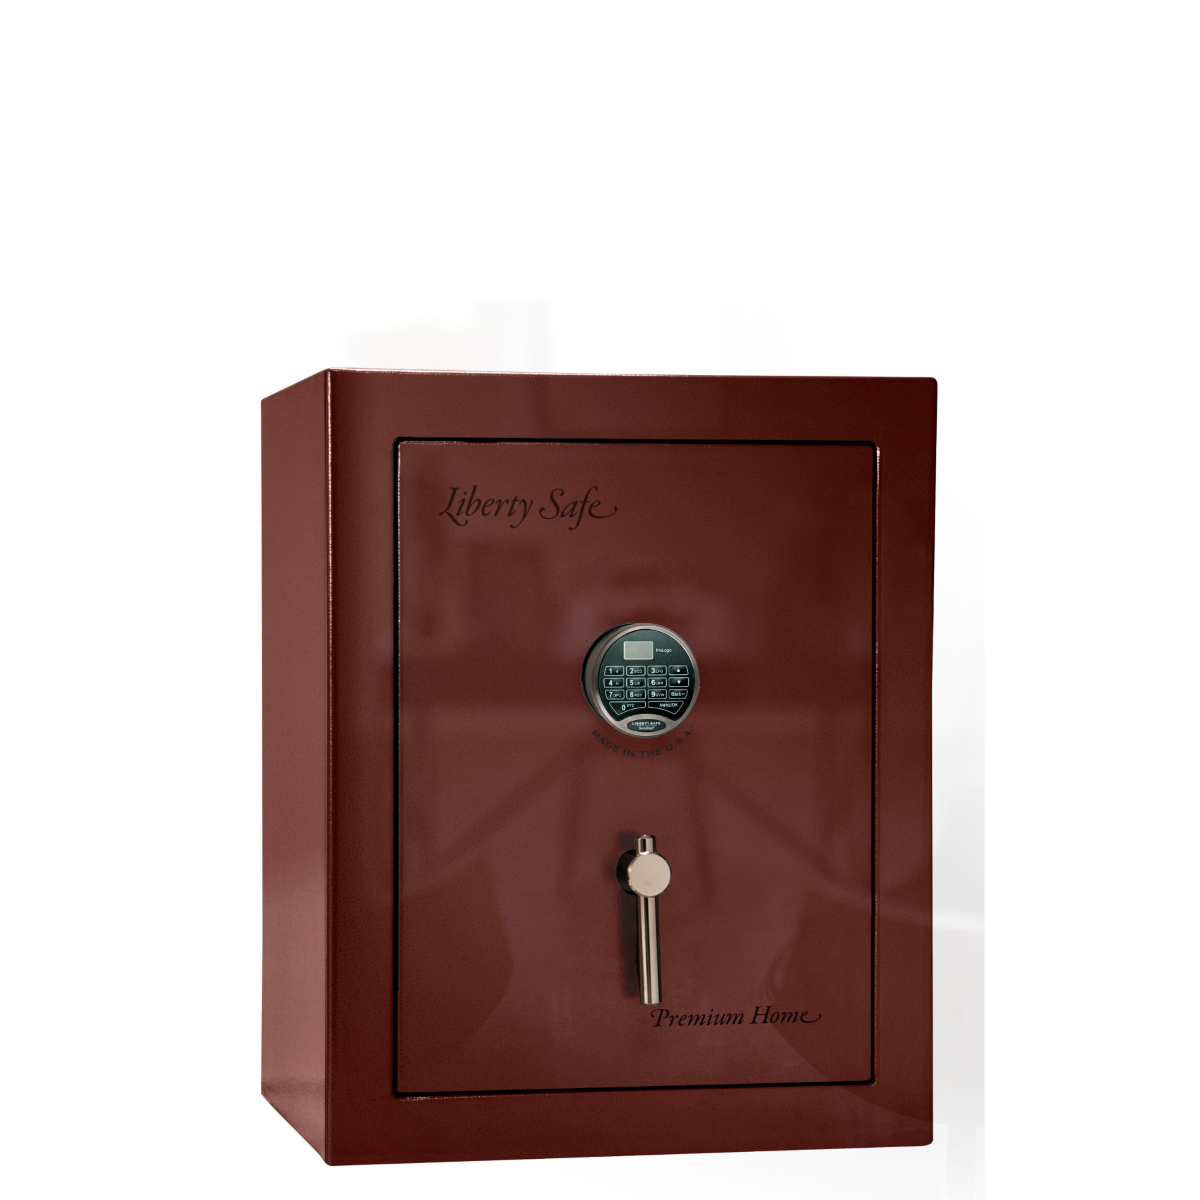 Premium Home Series | Level 7 Security | 2 Hour Fire Protection | 08 | Dimensions: 30"(H) x 24"(W) x 20.25"(D) | Burgundy Gloss Black Chrome - Closed Door